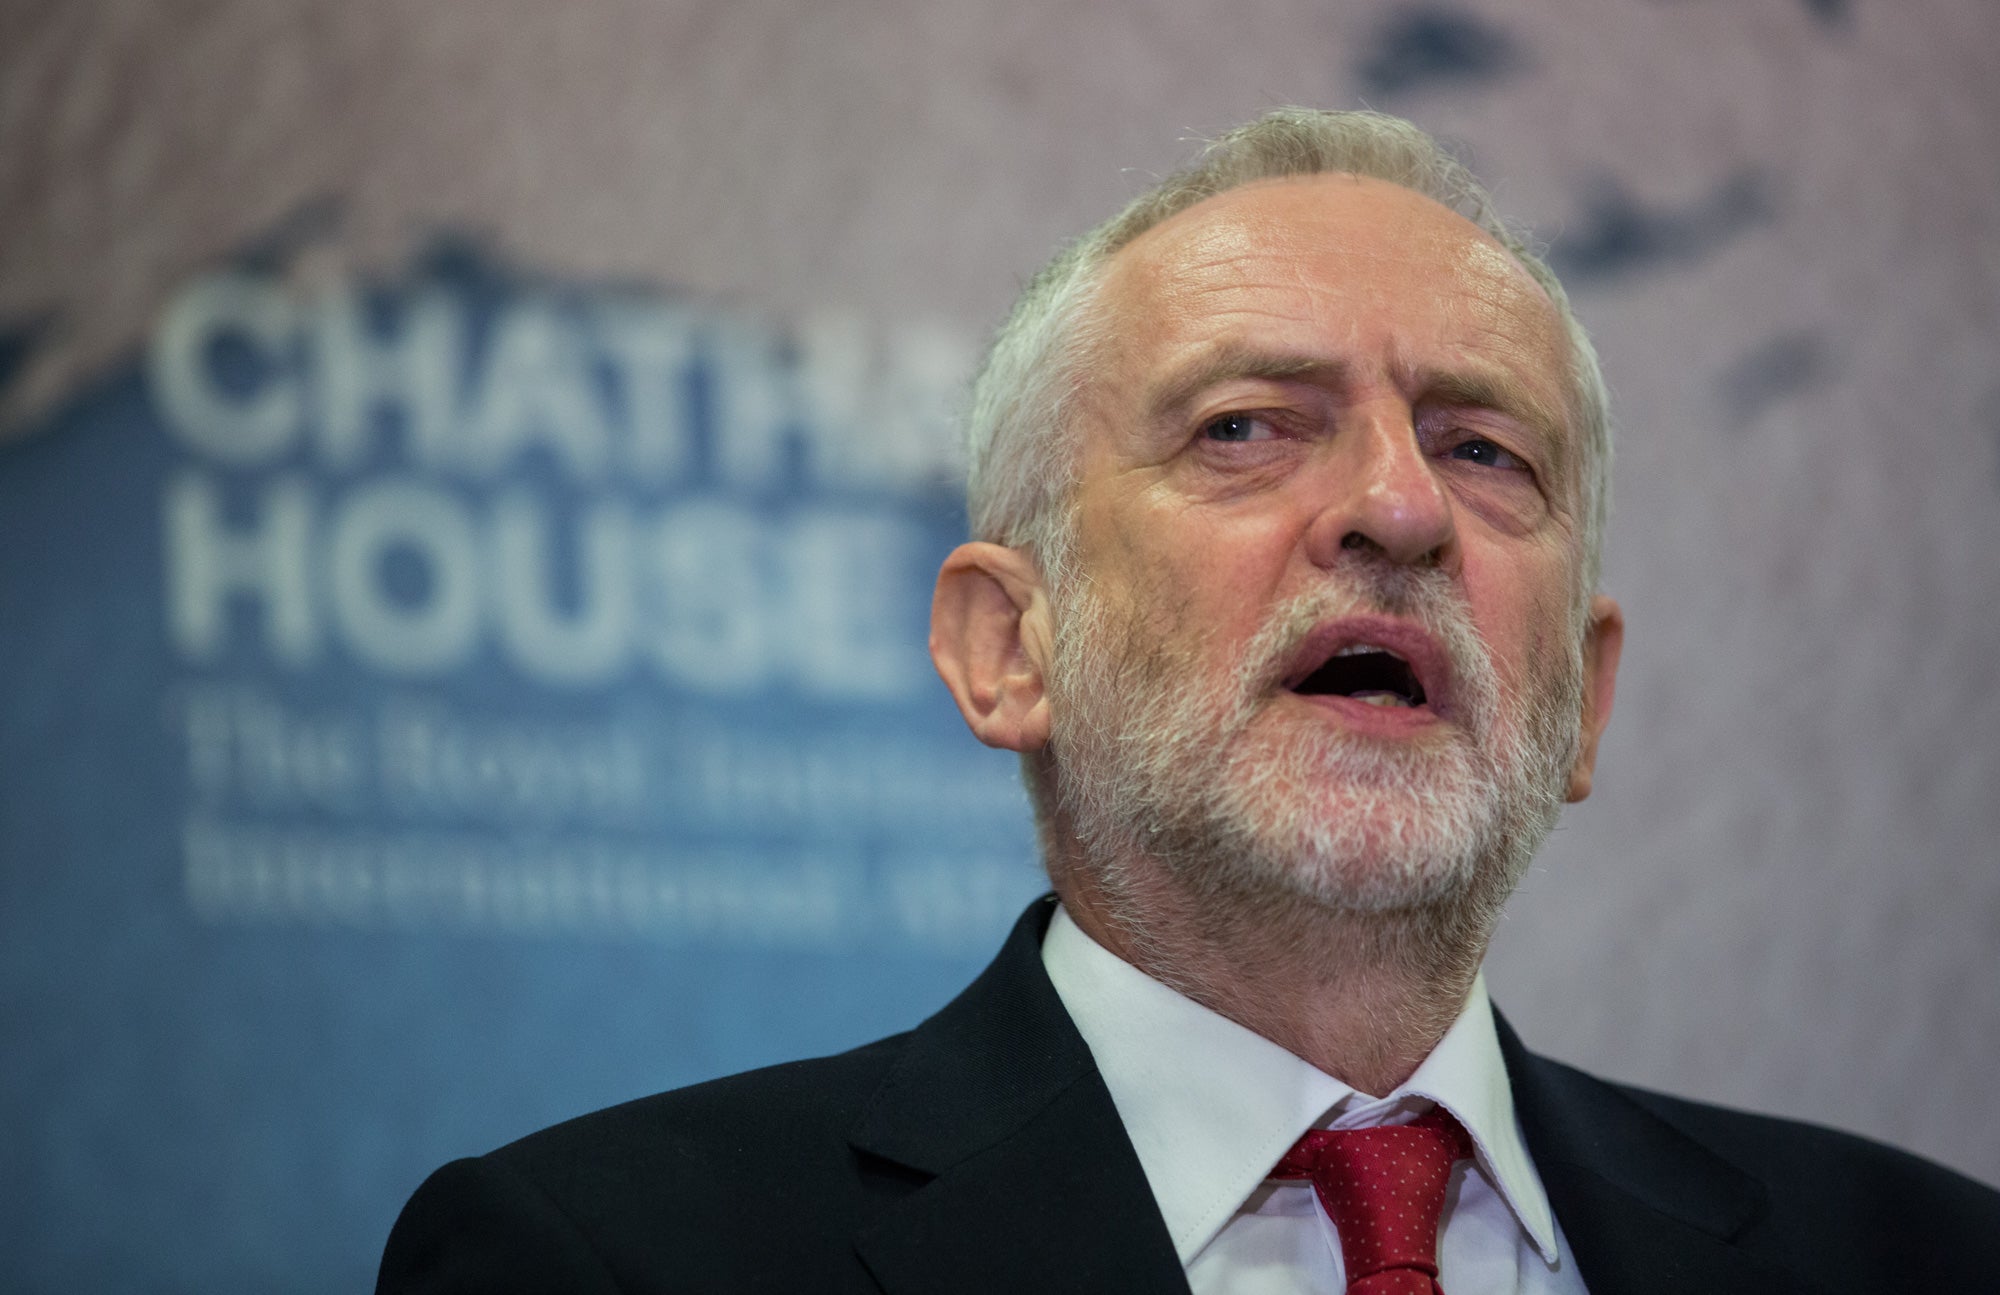 Will Corbyn threaten a ‘robot tax’ at the Labour Party Conference?